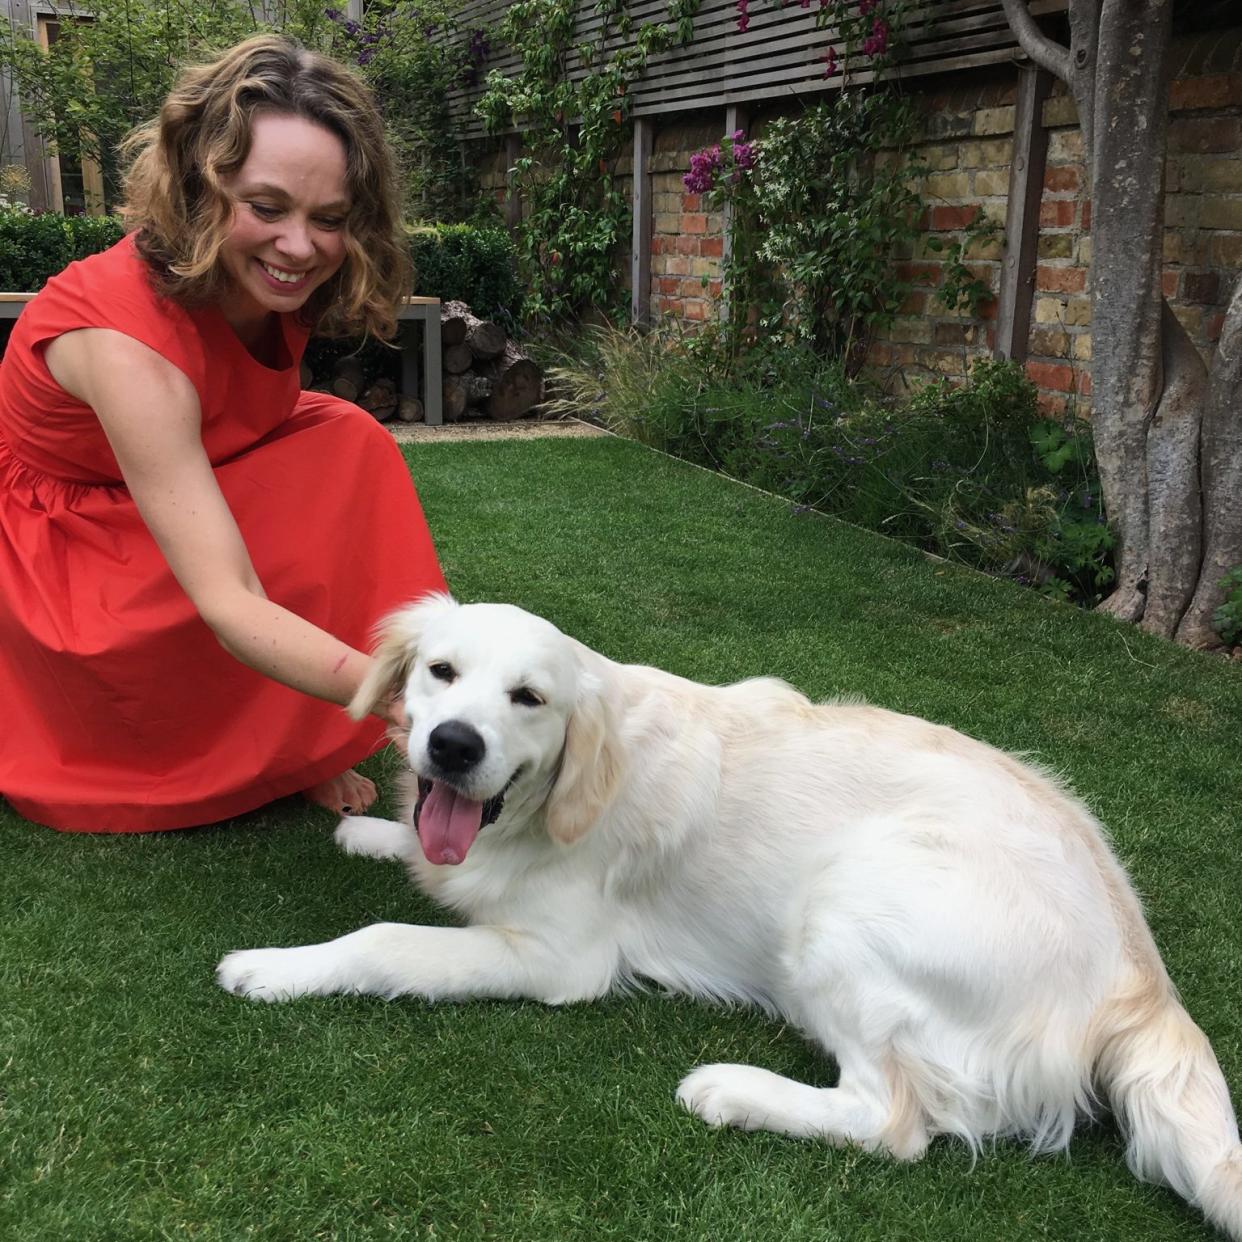 After a brush with strays in the past, golden retriever Harry has cured writer Eve Chase’s phobia